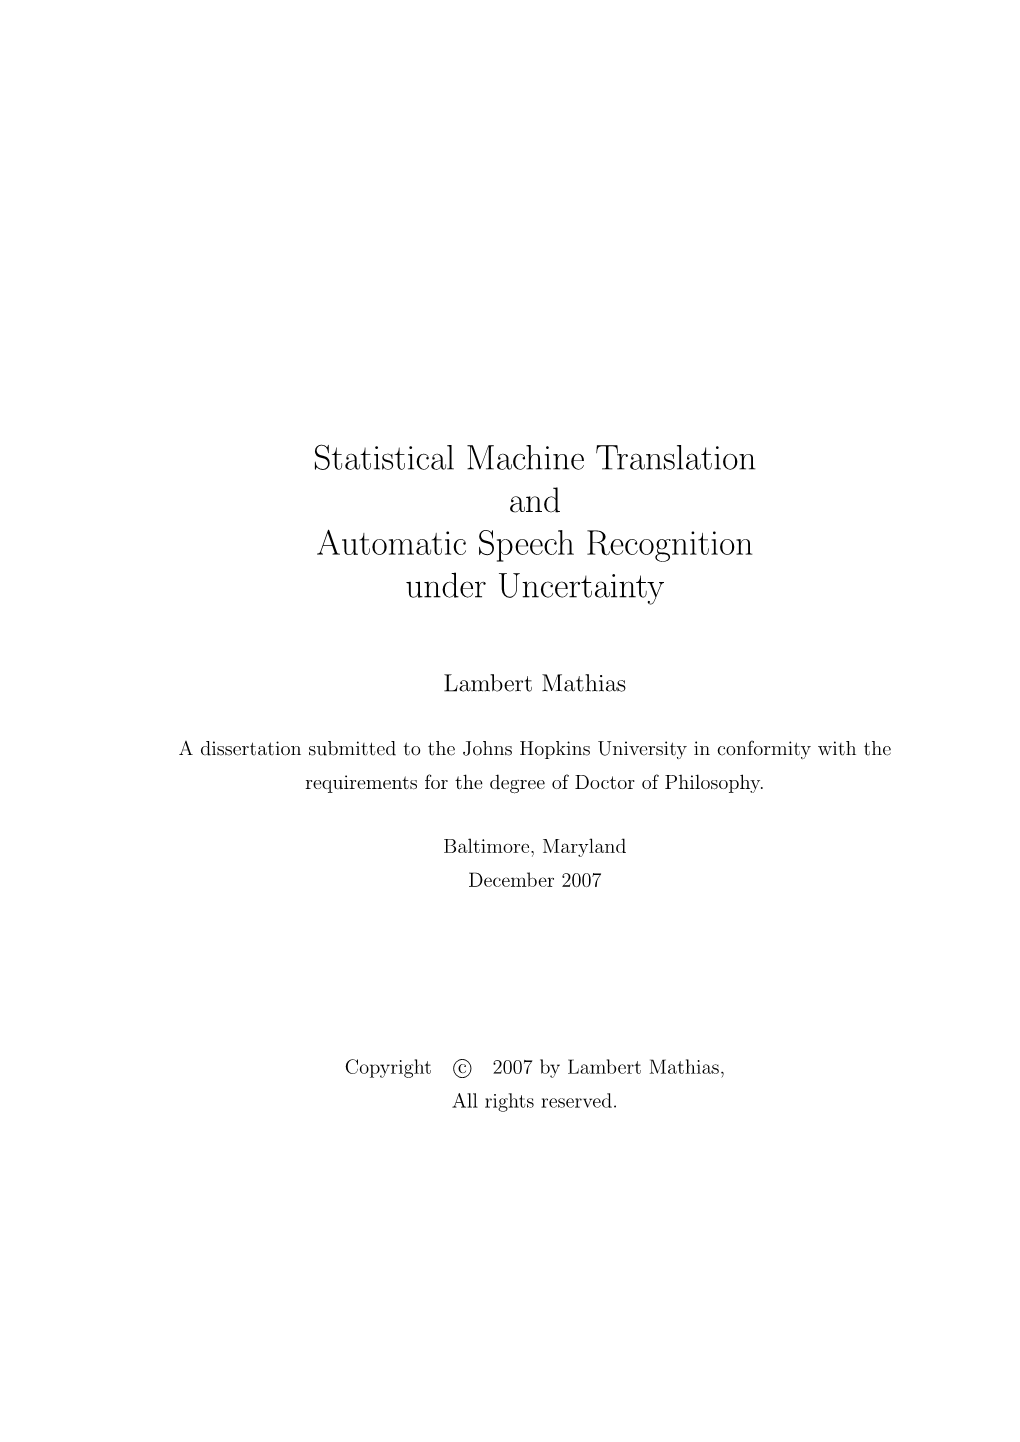 Statistical Machine Translation and Automatic Speech Recognition Under Uncertainty